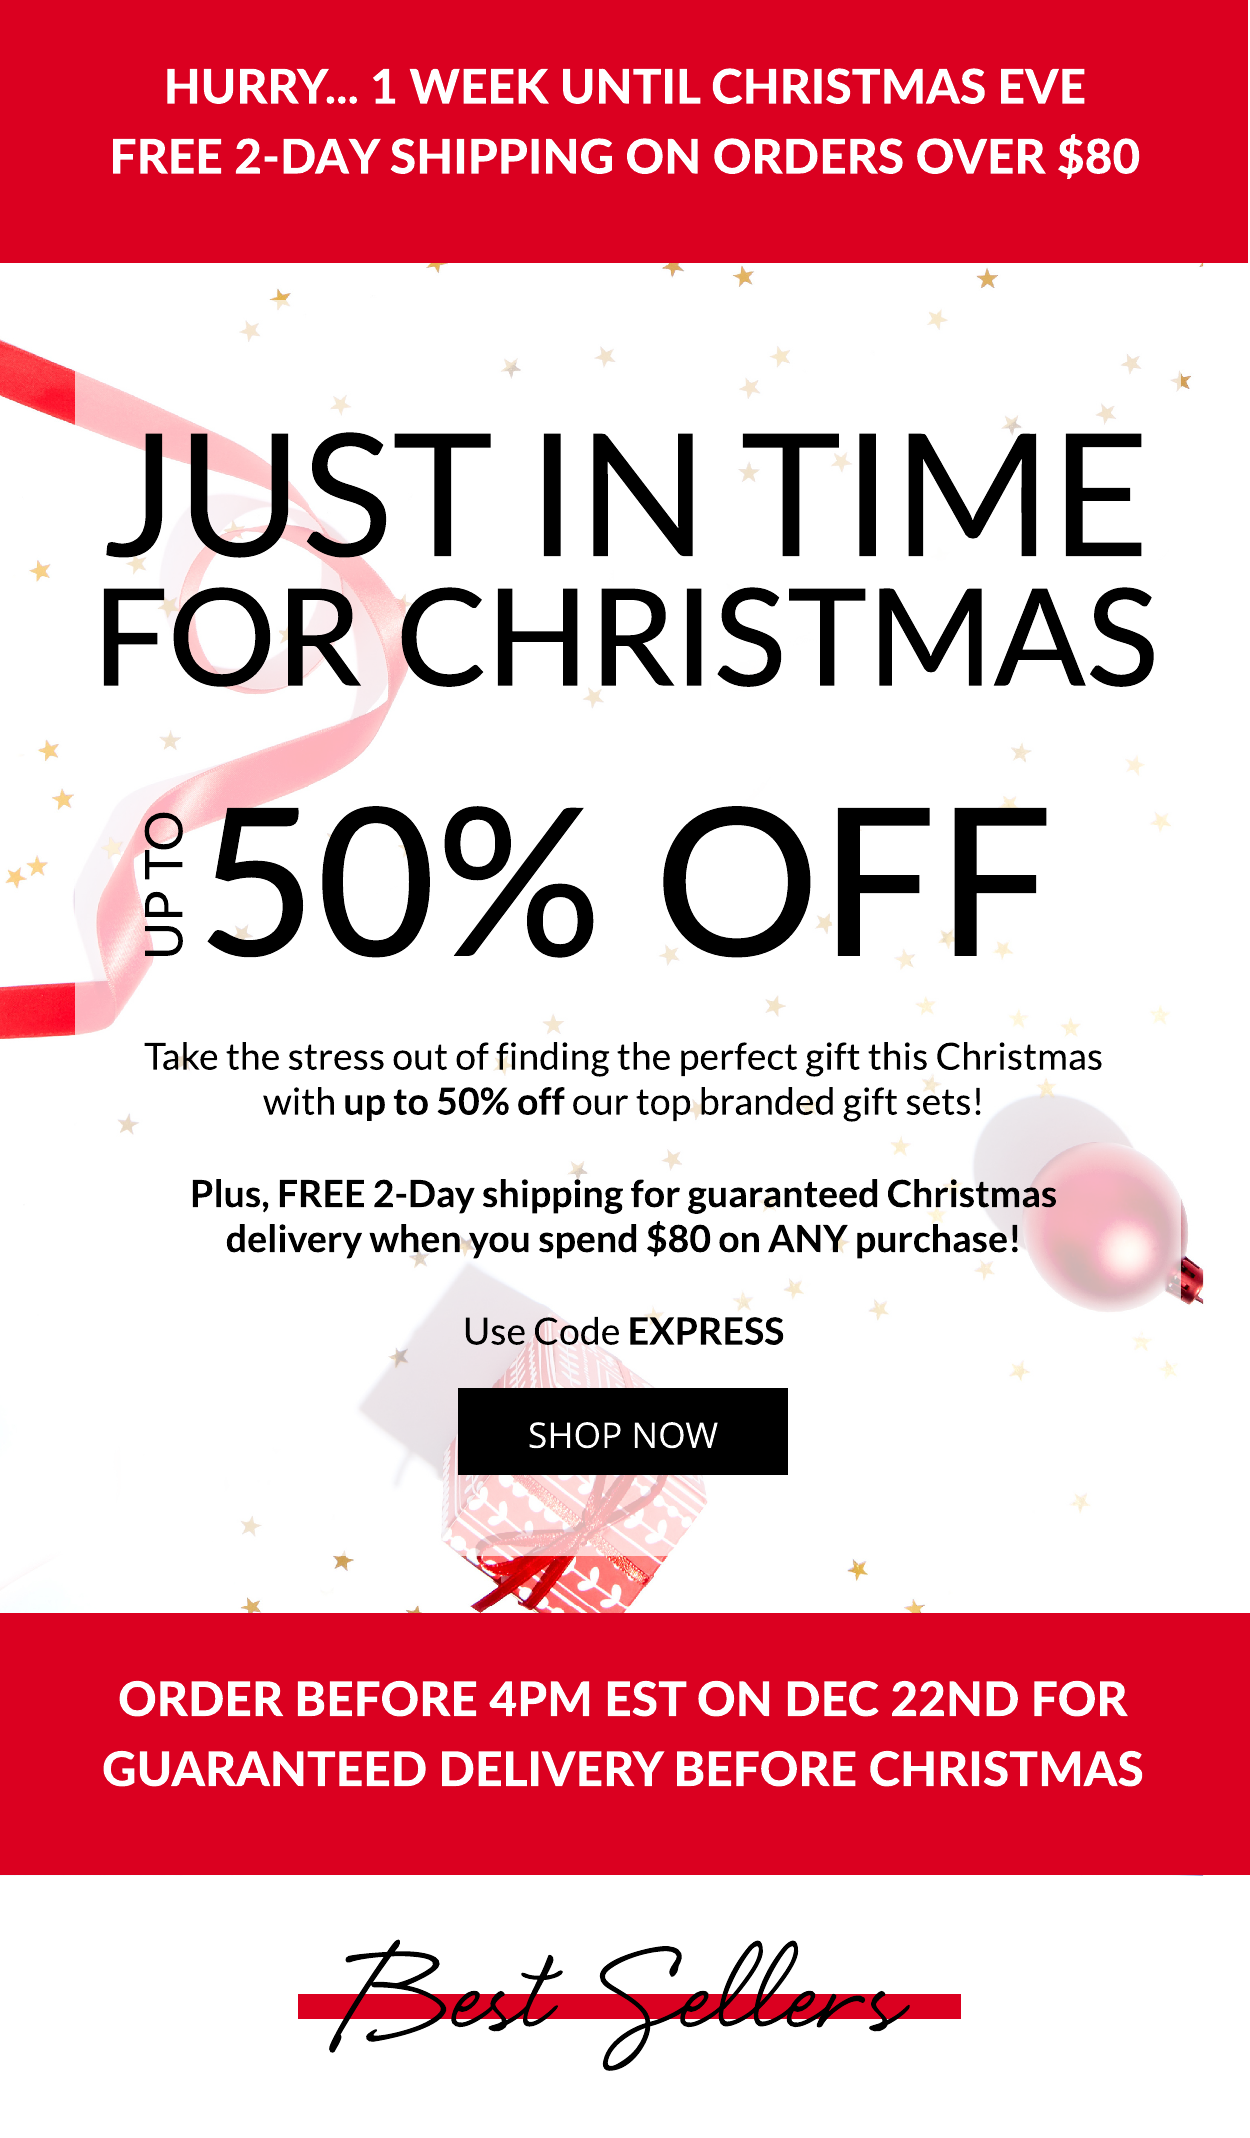 Free Express Shipping + Up to 50% Off Last Minute Gifting